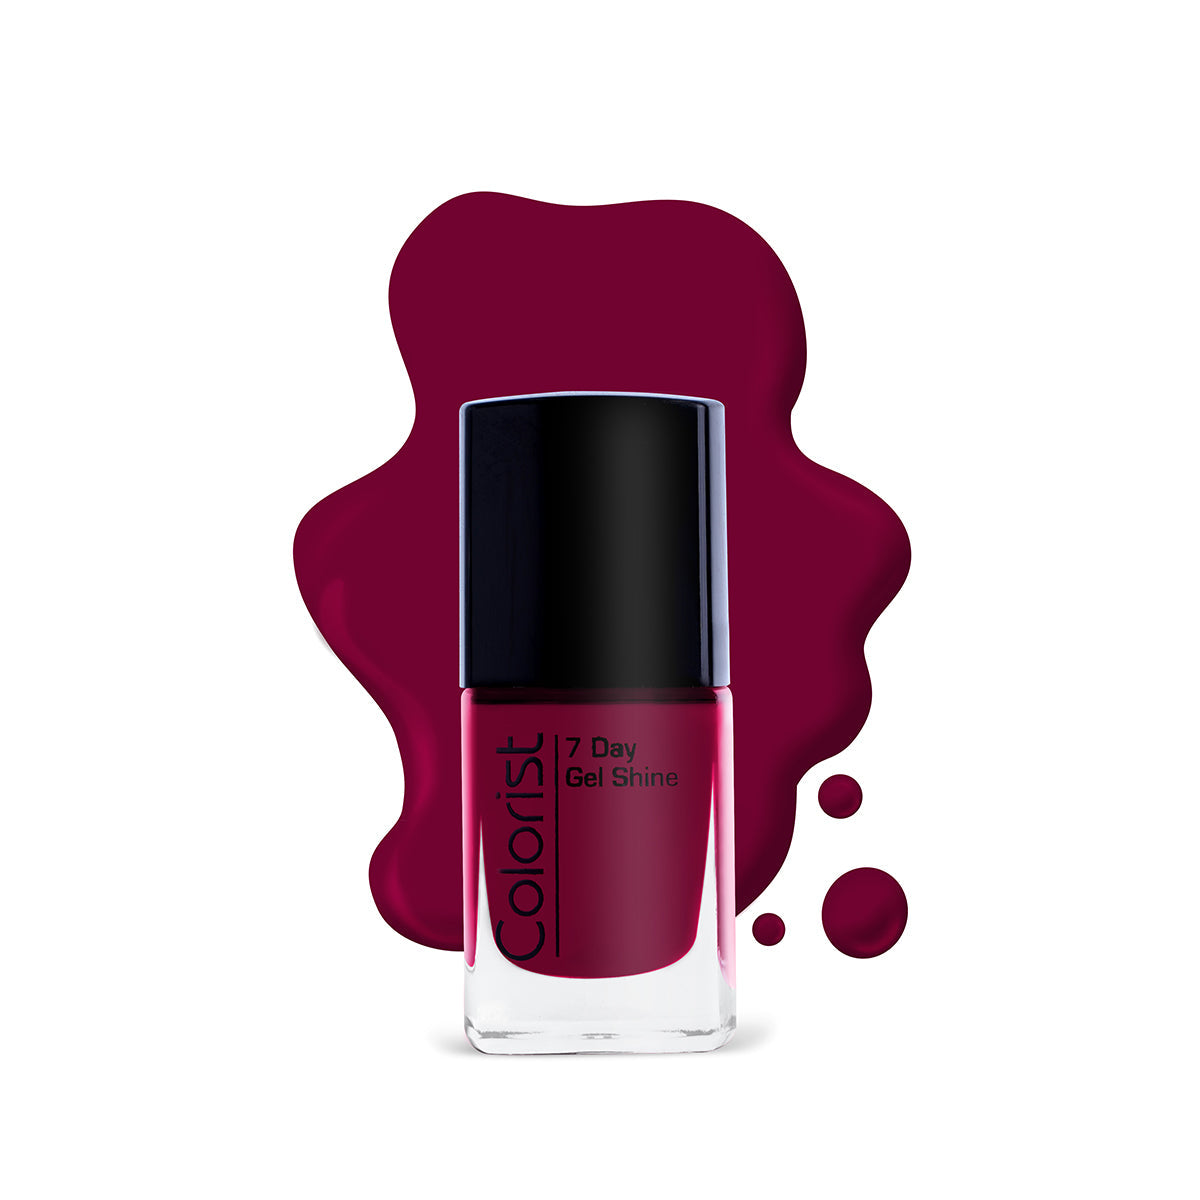 Buy  ST London - Colorist Nail Paint - ST003 - Vino - at Best Price Online in Pakistan